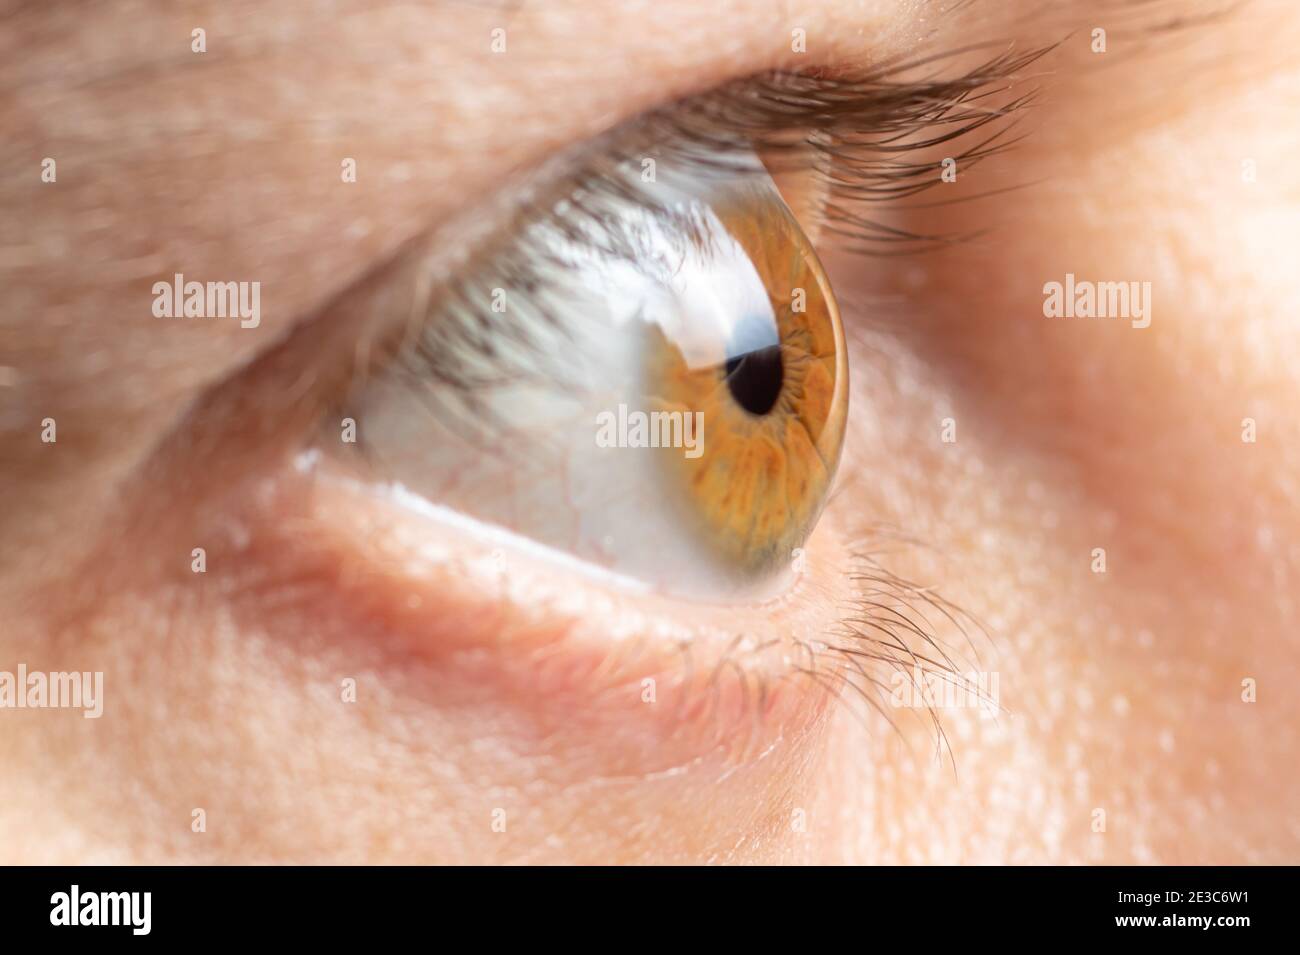 A man with glaucoma bulged his eyes. Increased intraocular pressure, eye disease Stock Photo